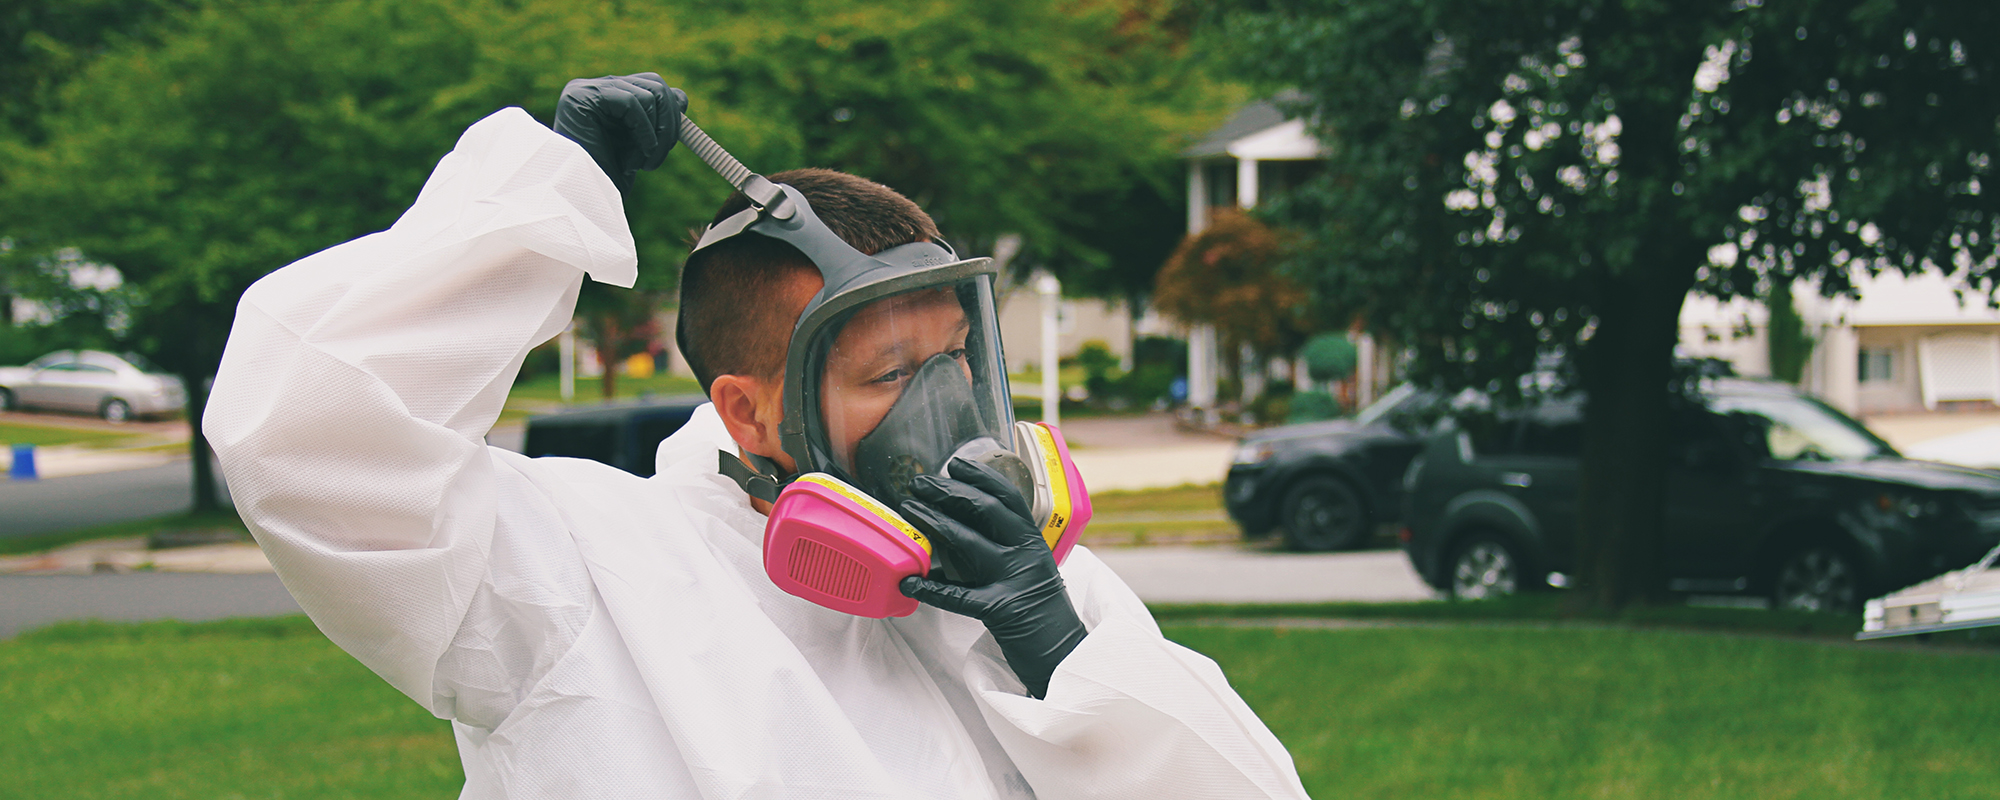 mold-remediation-chesterfield-nj